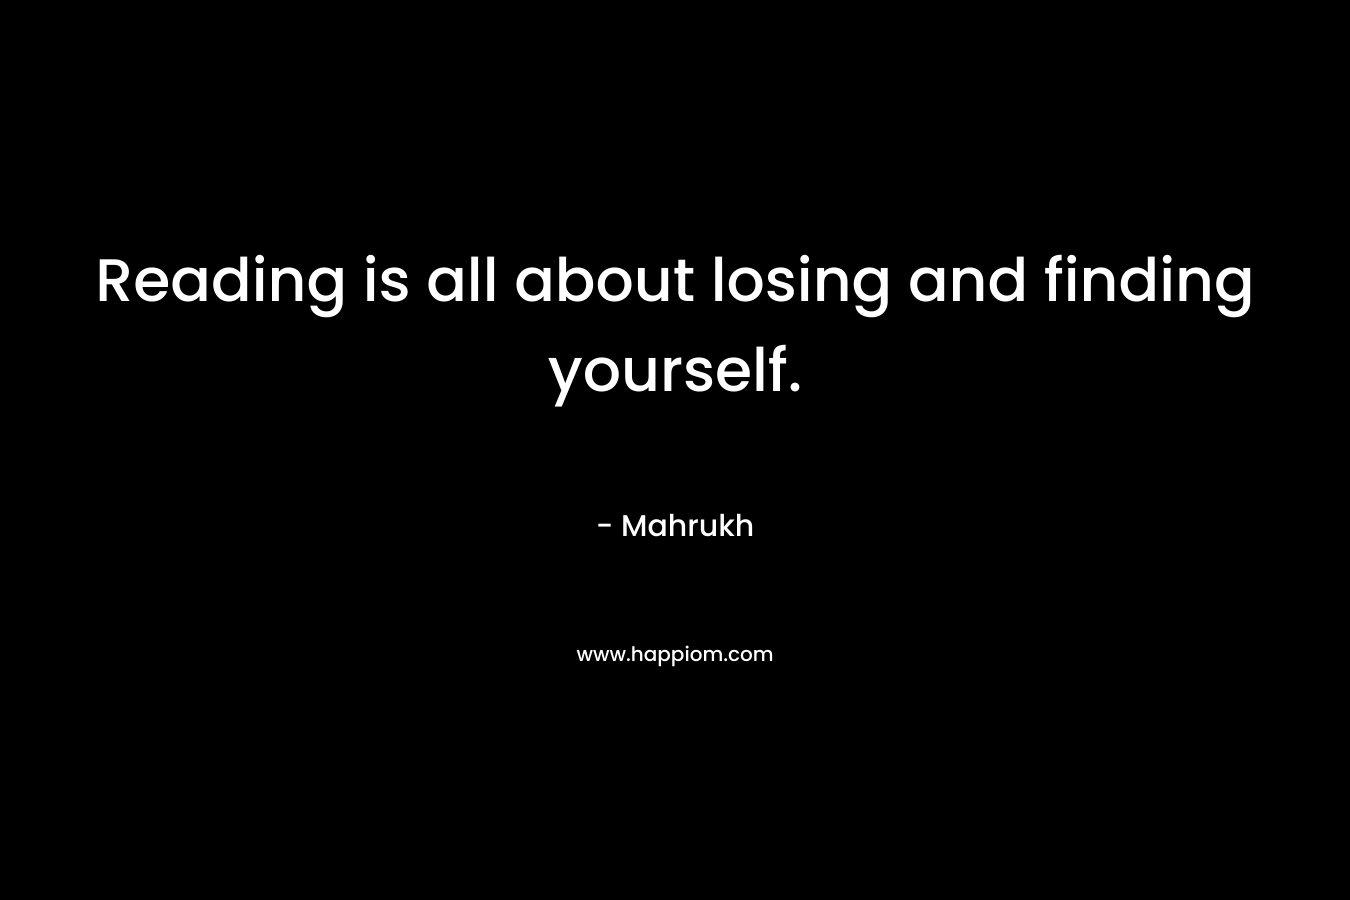 Reading is all about losing and finding yourself.